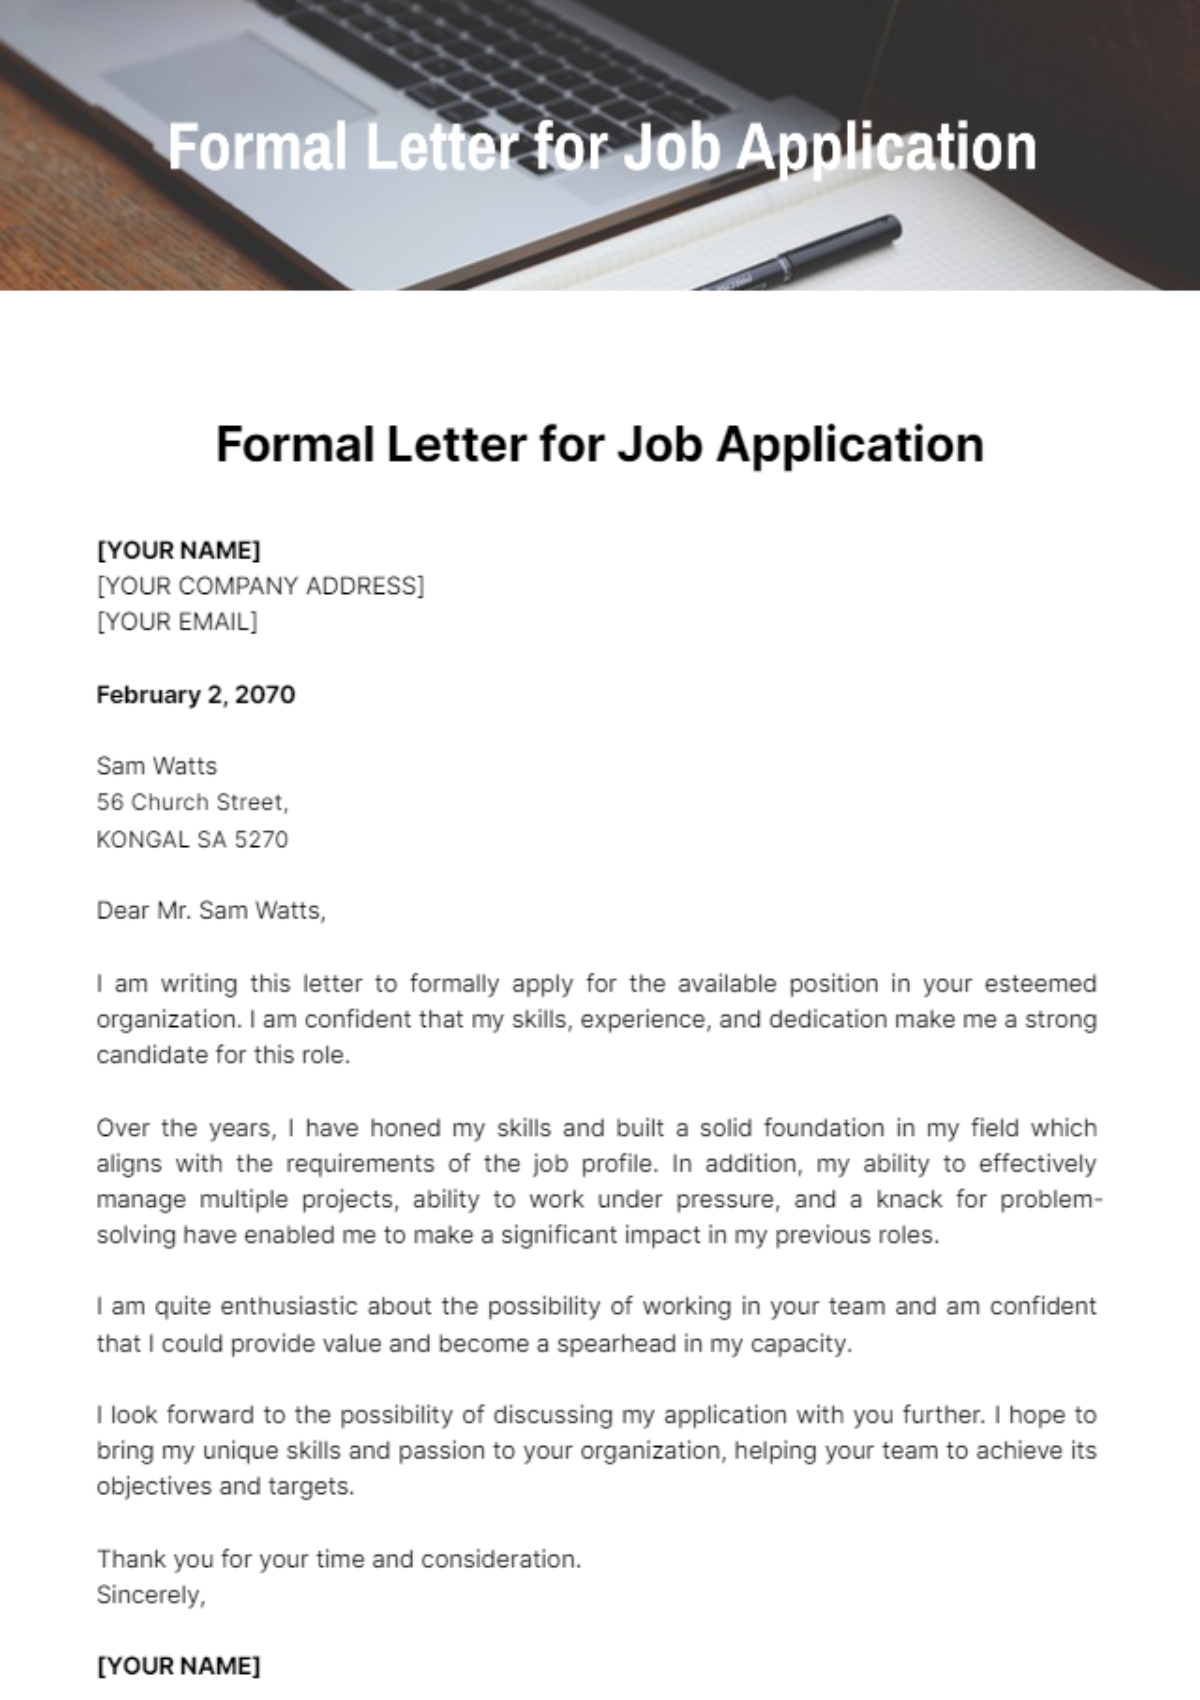 Free Formal Letter for Job Application Template